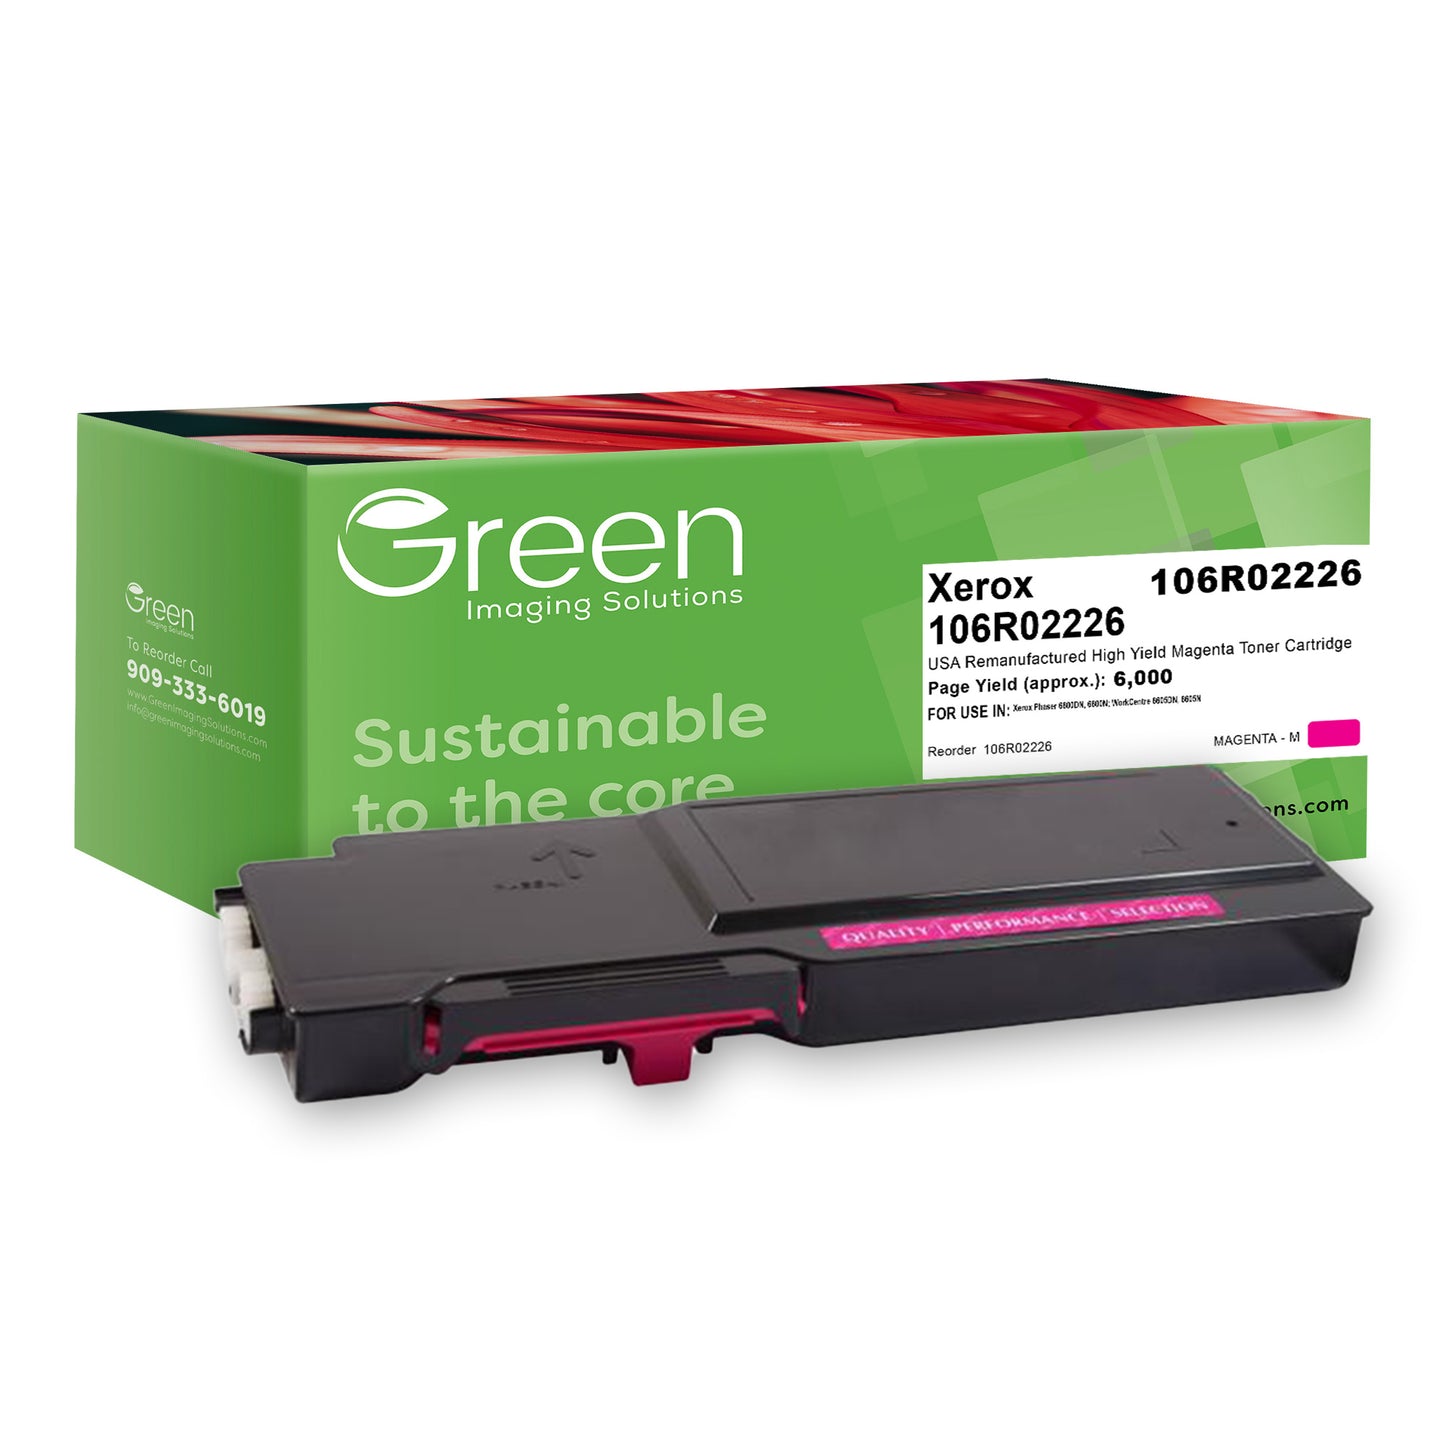 Green Imaging Solutions USA Remanufactured High Yield Magenta Toner Cartridge for Xerox 106R02226